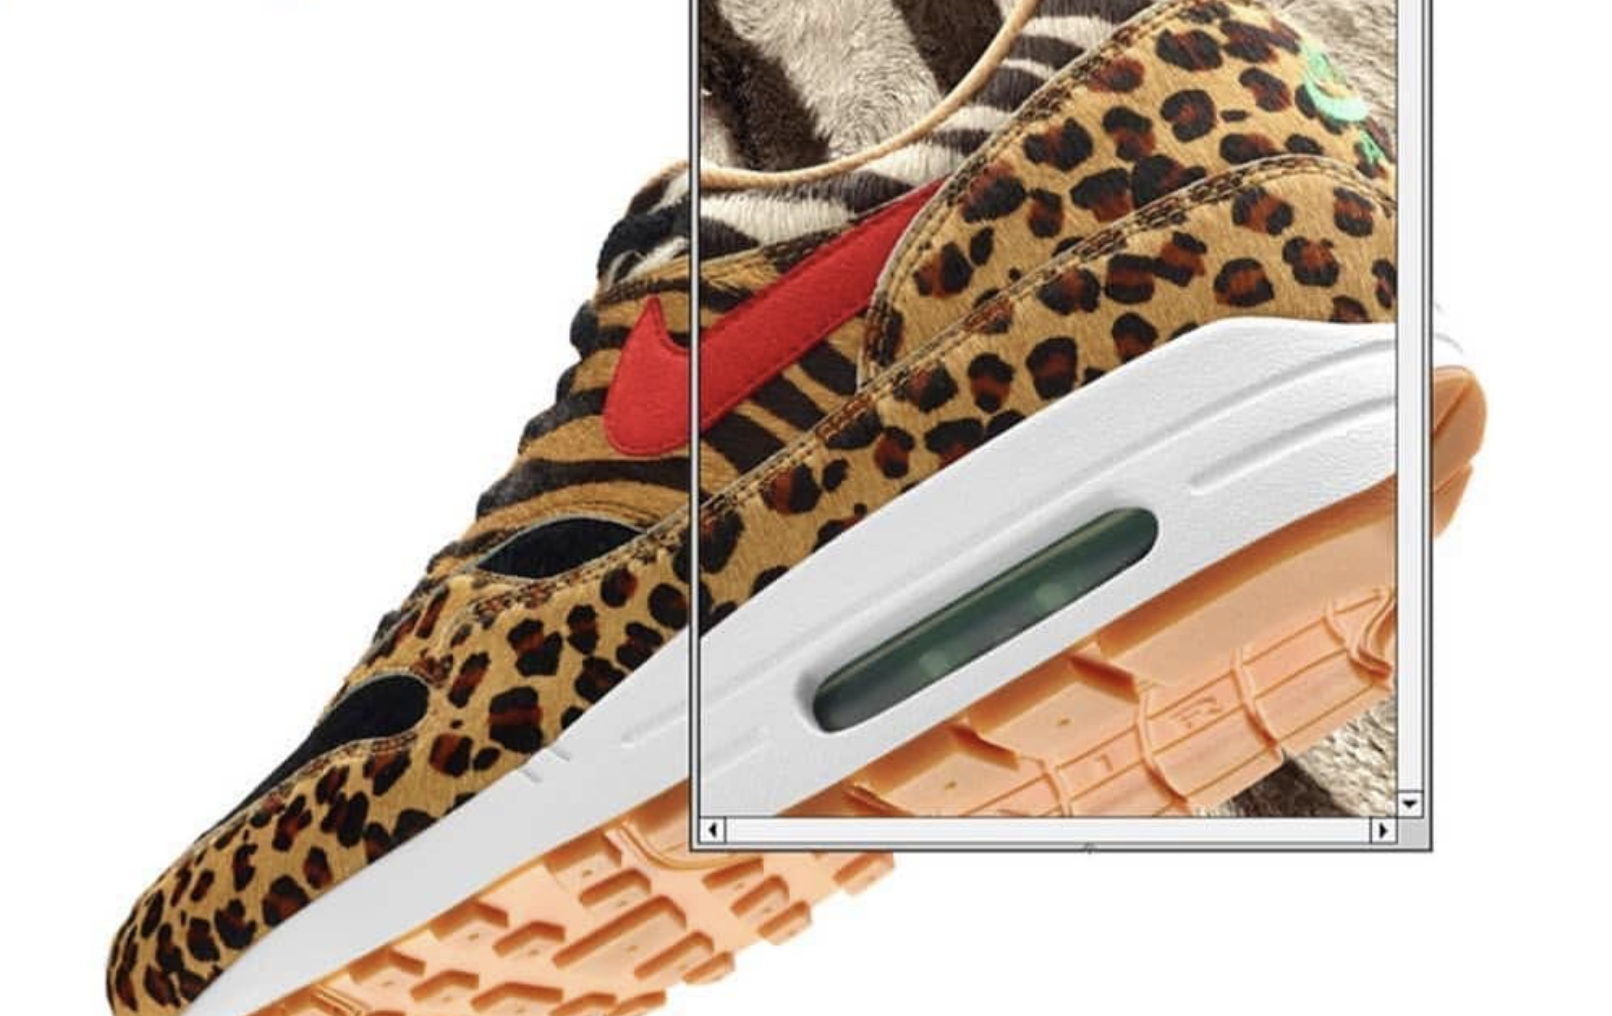 air max day 2018 animal pack